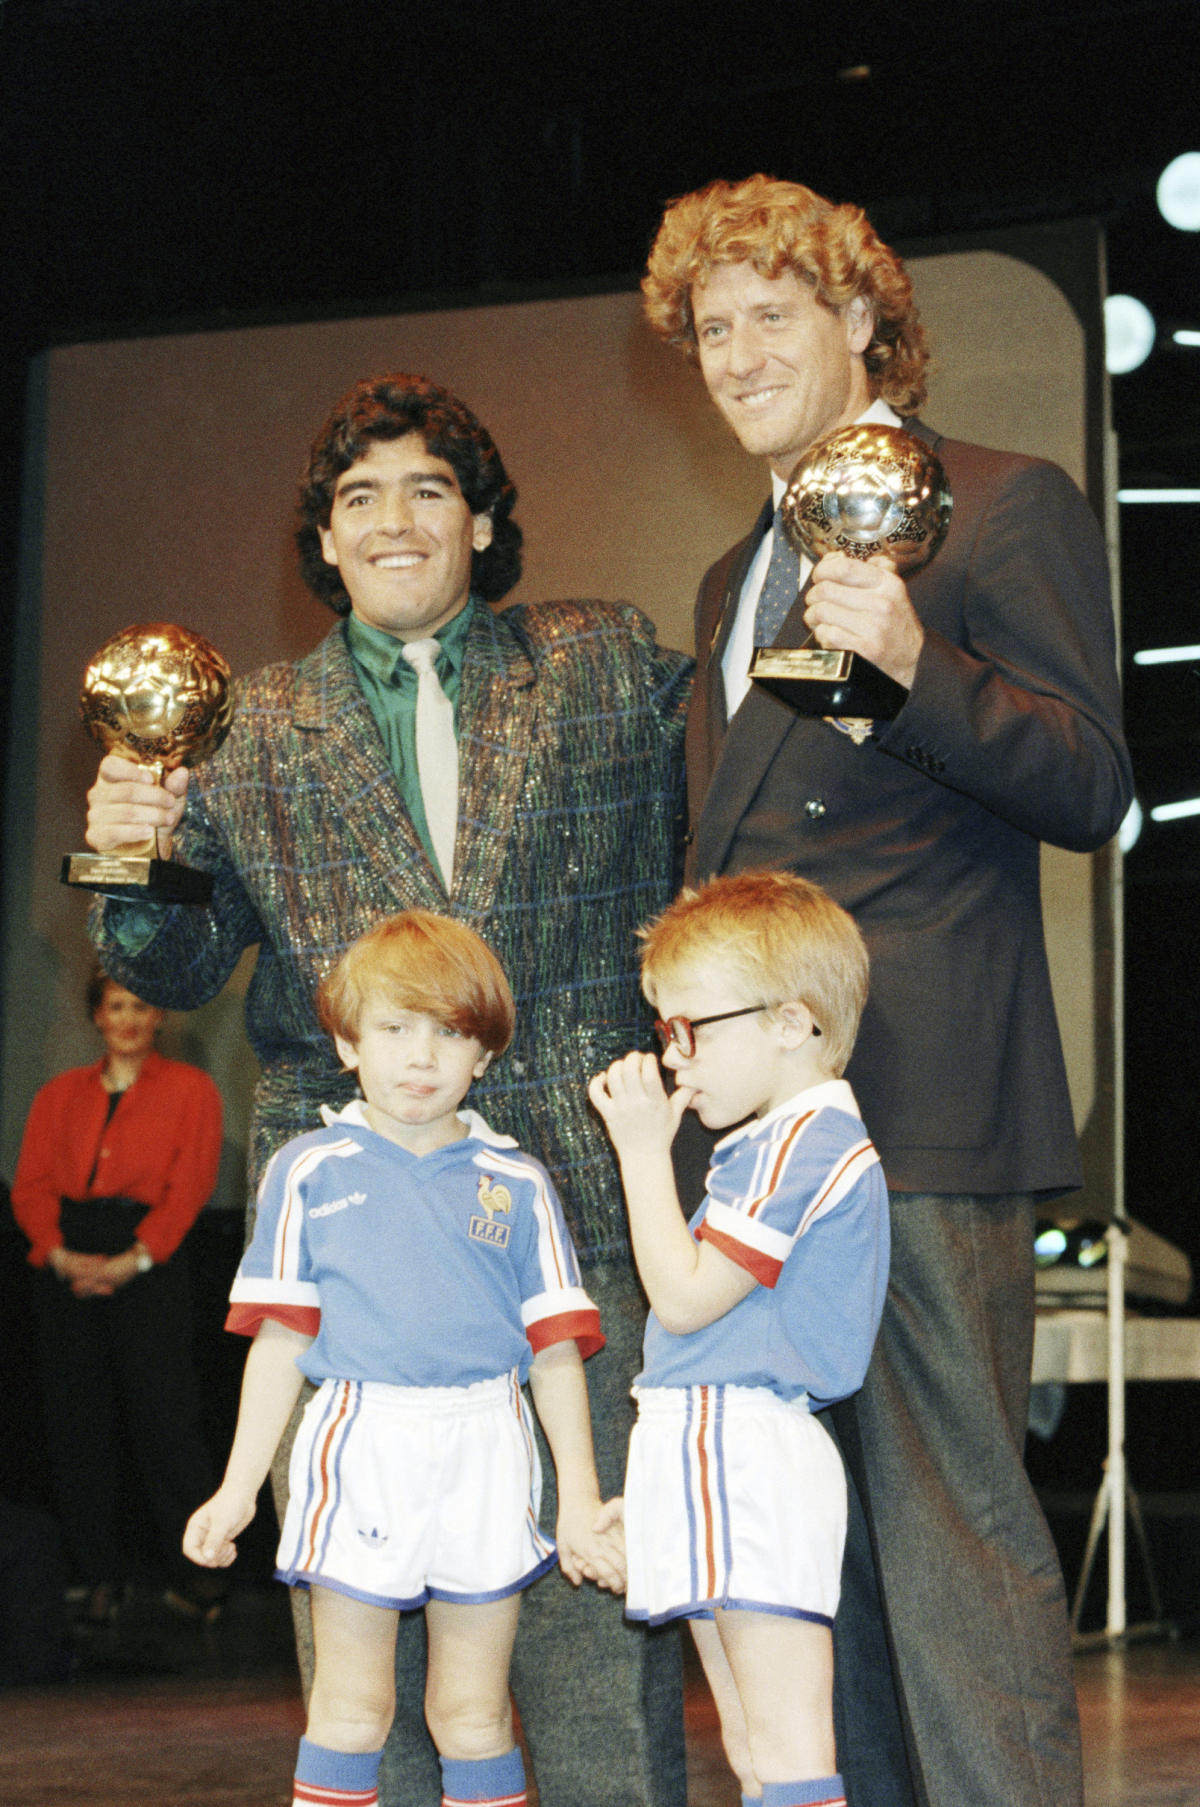 The disappearance of Maradona’s World Cup Golden Ball trophy leads to auction in Paris